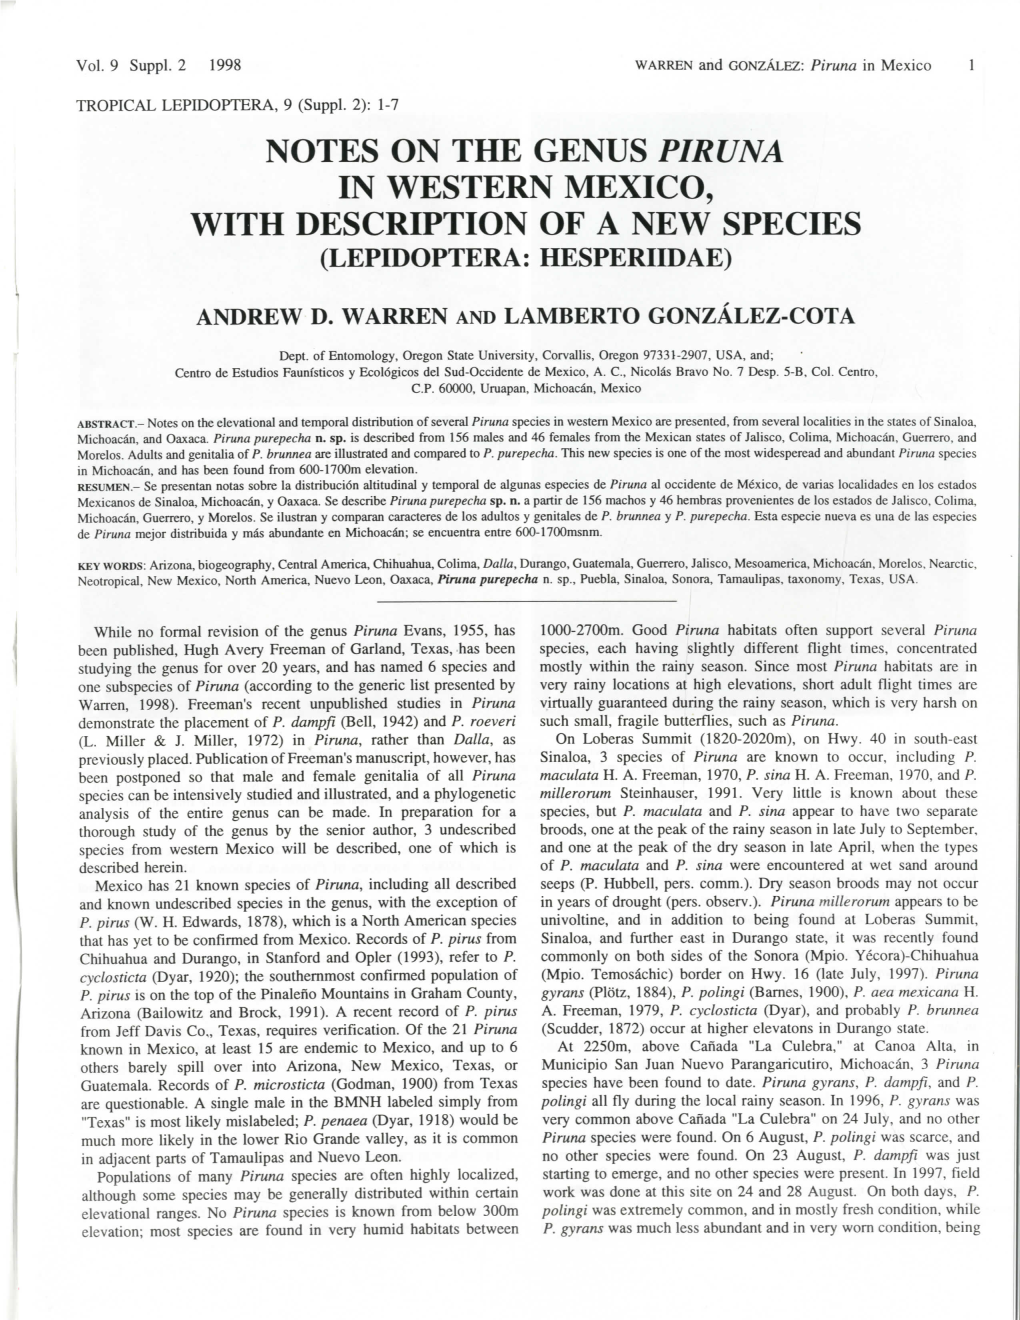 Notes on the Genus Piruna in Western Mexico, with Description of a New Species (Lepidoptera: Hesperiidae)